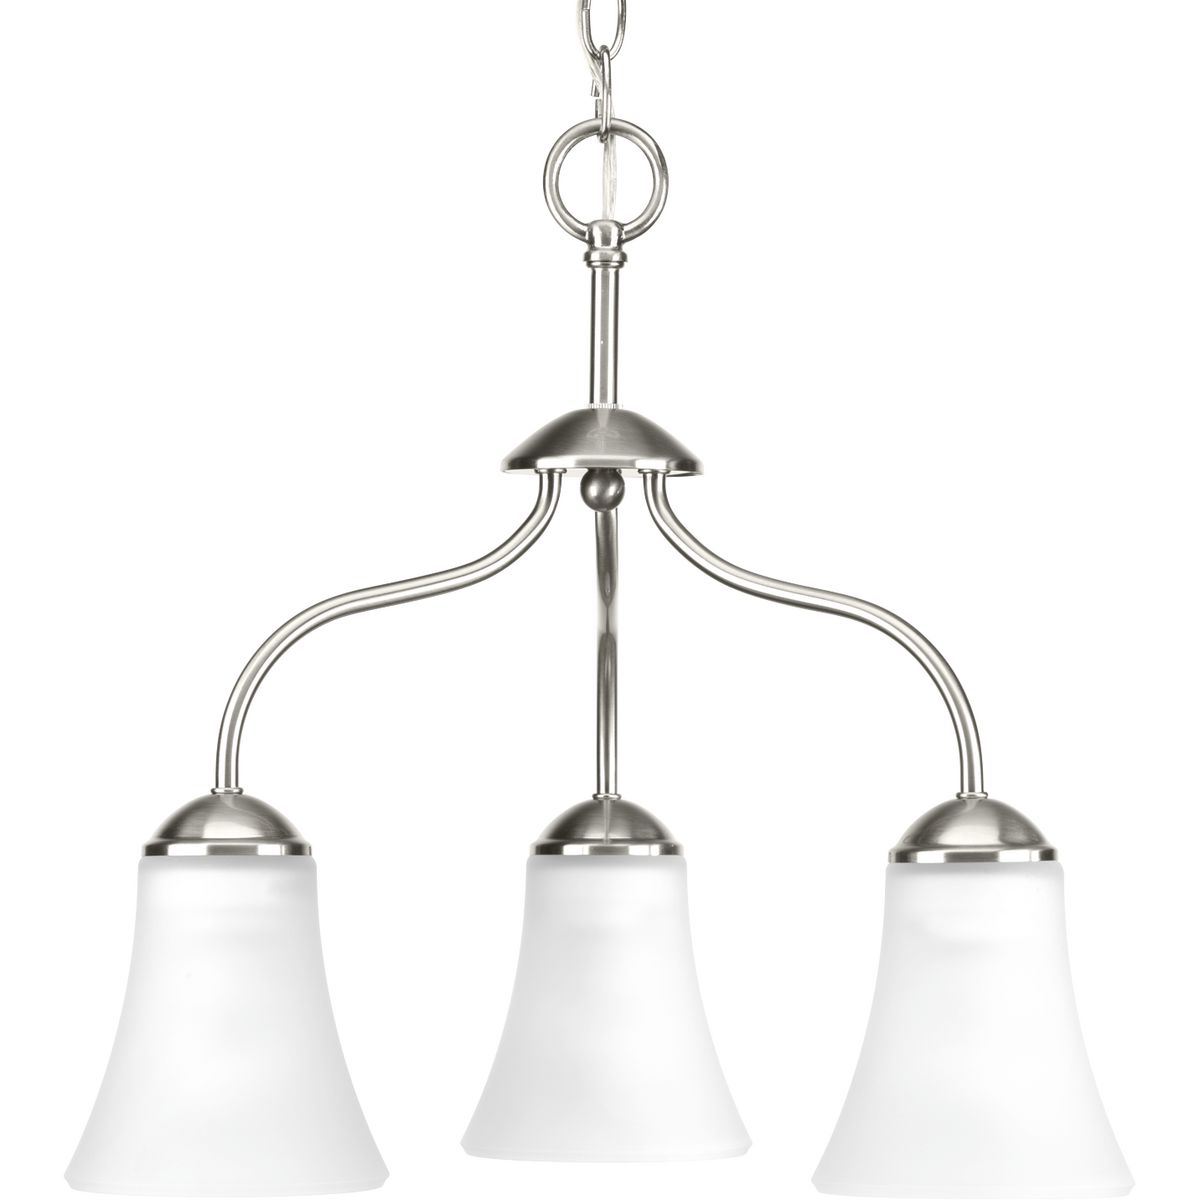 Traditional details and graceful lines provide modern elegance to any interior. The Classic three-light chandelier features etched glass shades with a Brushed Nickel finish.